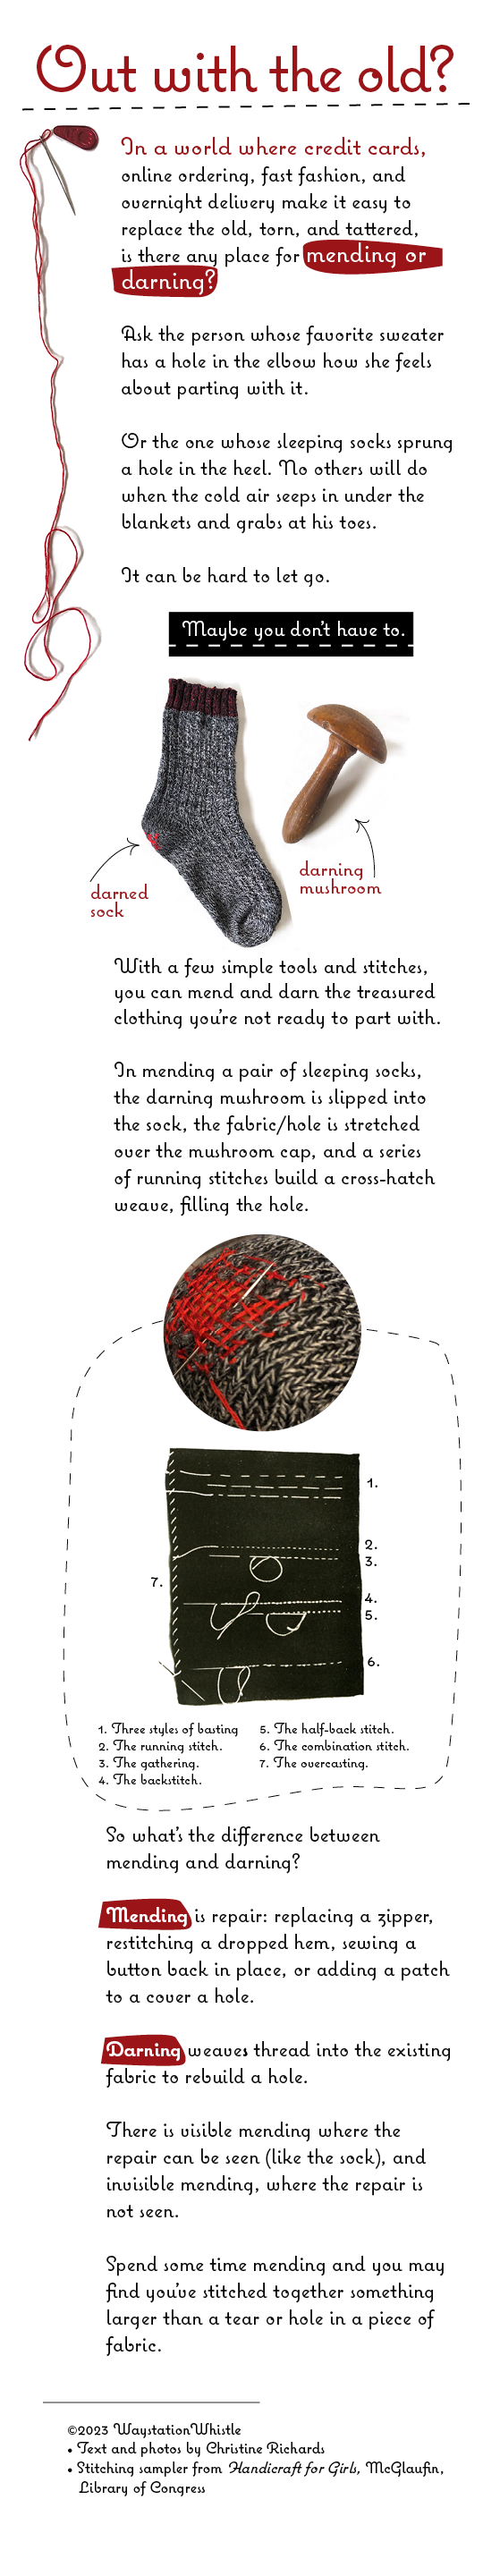 Infographic of stitching/darning a sock with images of a needle and red thread, the sock with a red stitched patch, a mushroom darning tool, close-up of stitches, and stitching sampler